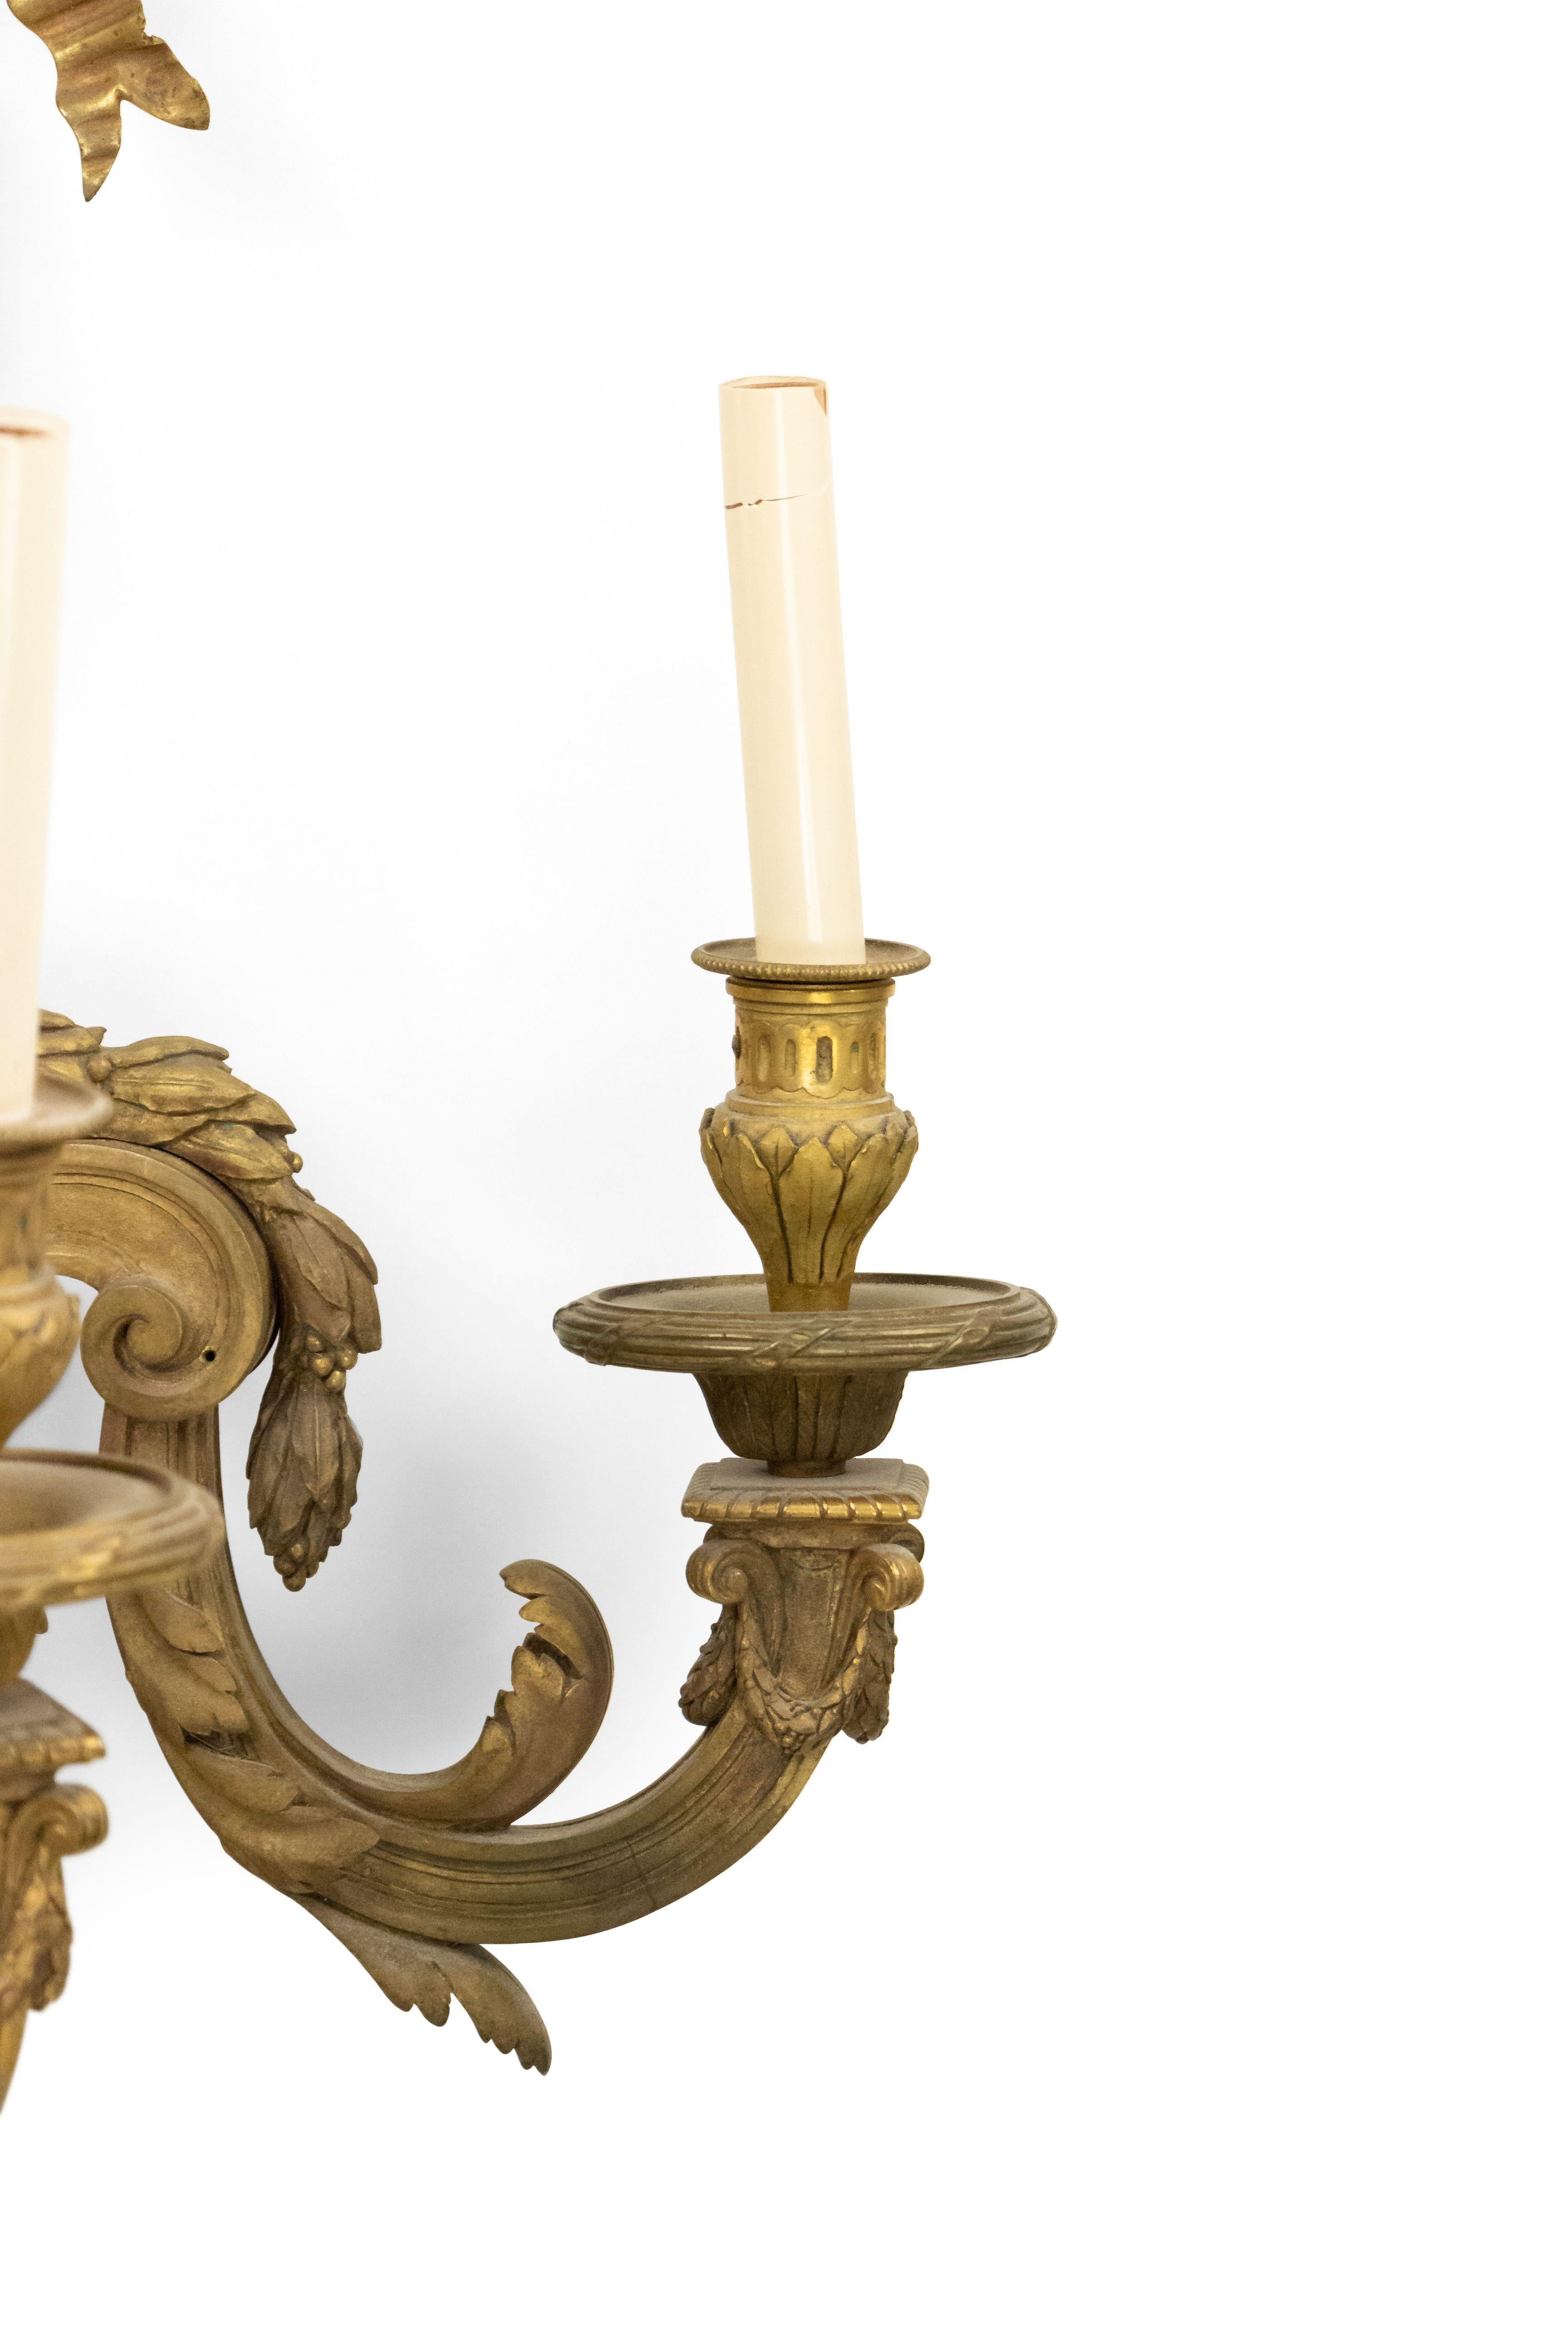 French Louis XVI-style (19th Century) bronze dore wall sconce with three scroll arms, bow knot top, and festoon design. (signed: G VIAM).
  